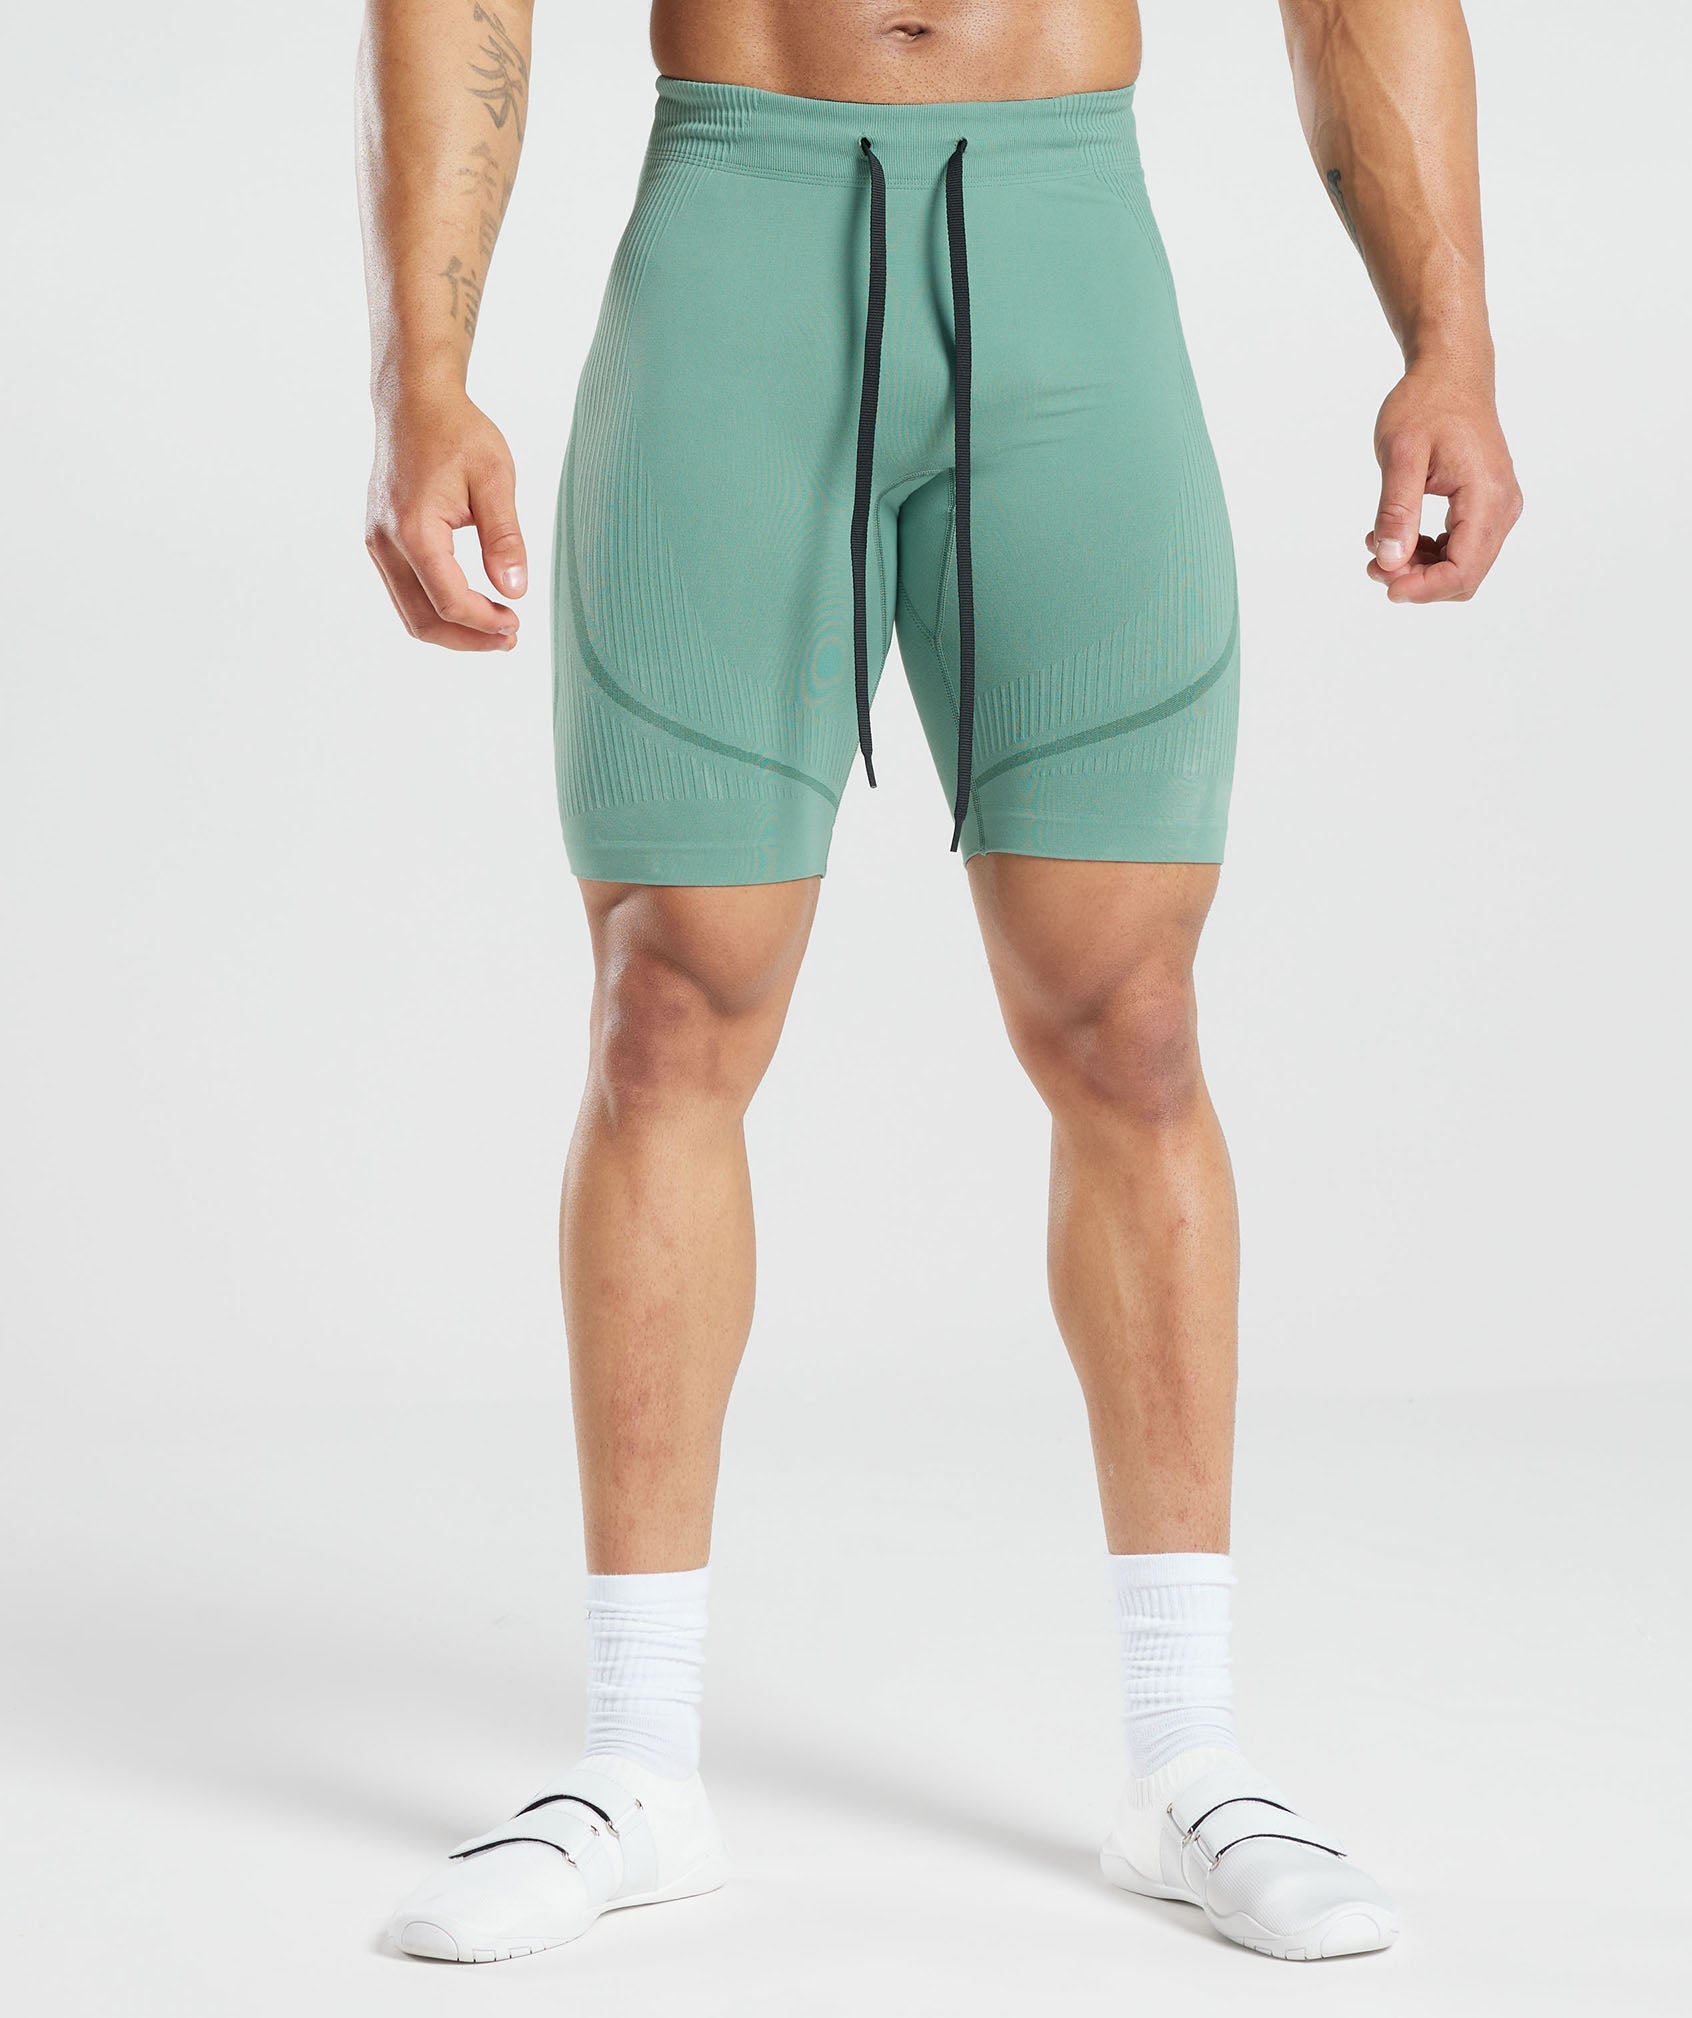 315 Seamless Shorts in Ink Teal/Jewel Green - view 1